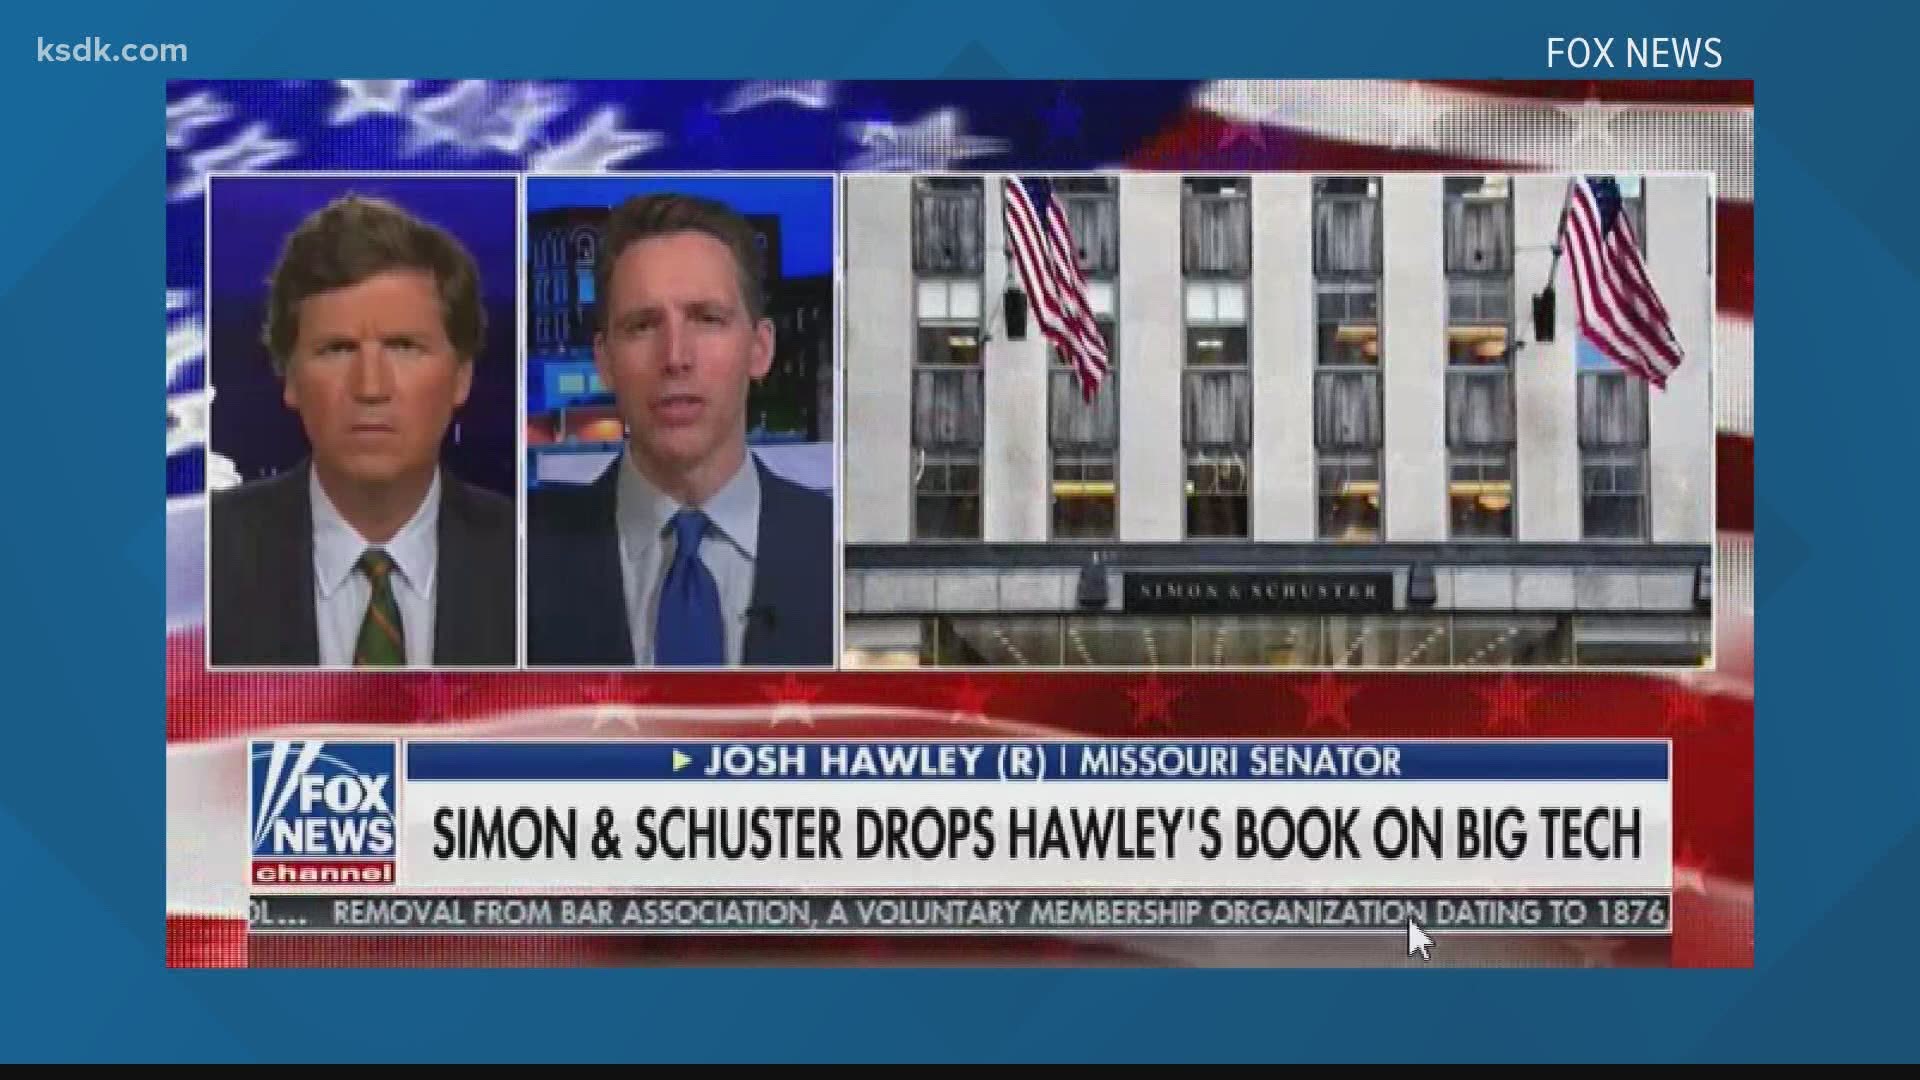 In a short interview with Fox News' Tucker Carlson, Hawley claimed the First Amendment was under attack, citing his lost book deal